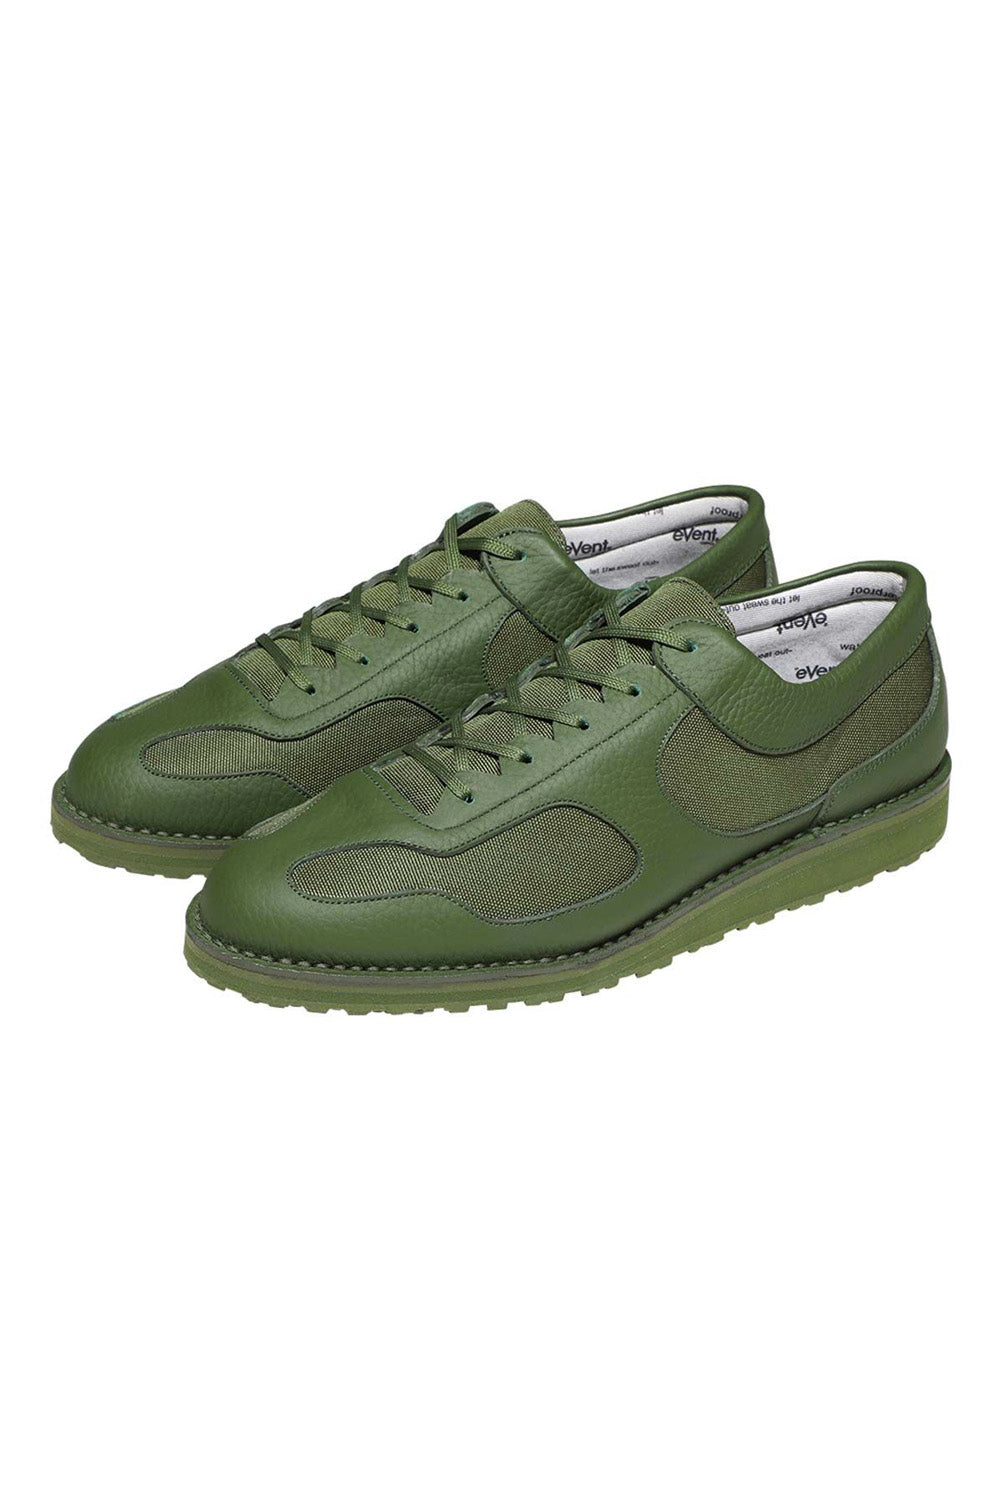 The CAV EMPT - CAV SHOES #1 GREEN GREEN available online with global shipping, and in PAM Stores Melbourne and Sydney.